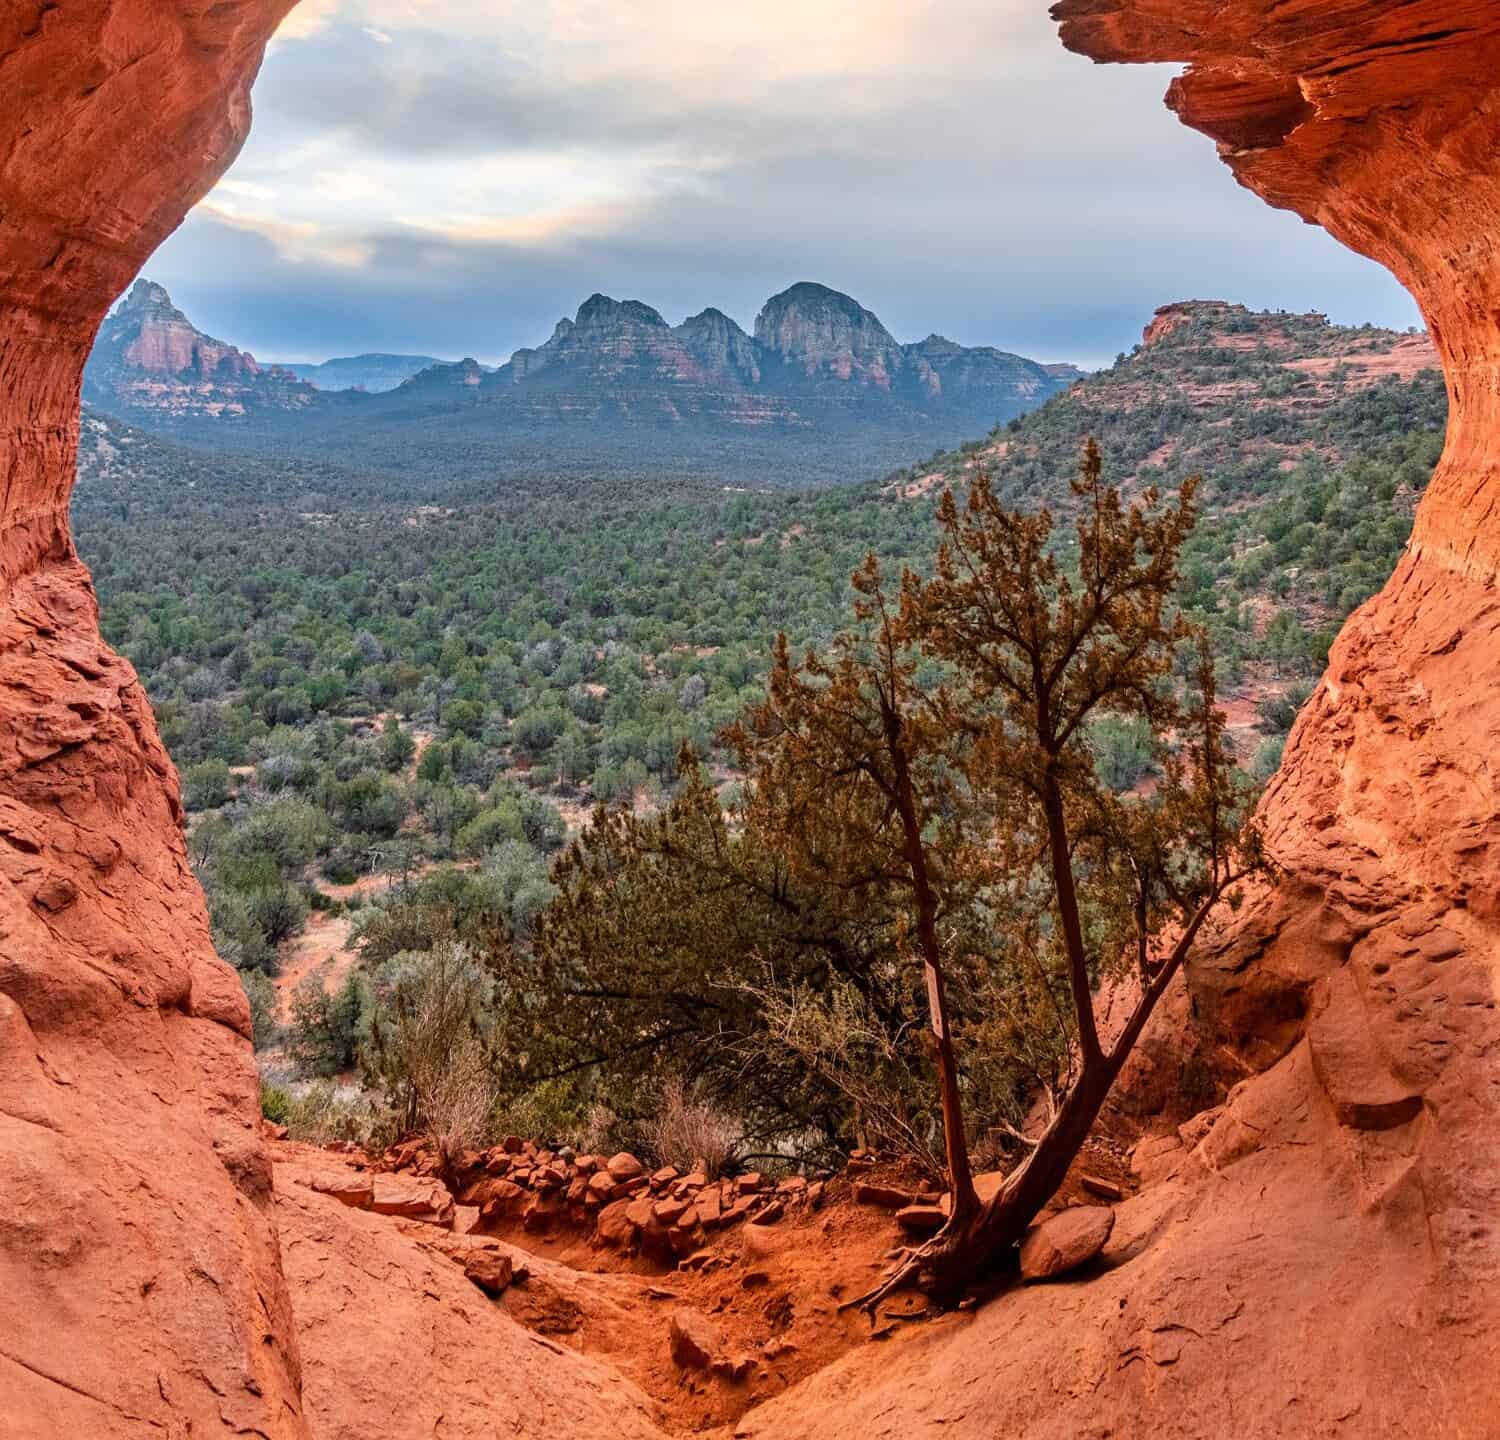 The Birthing Cave is one of many popular hikes in Sedona, Arizona. It is an interesting spot to check out. Everything is better at sunrise. 